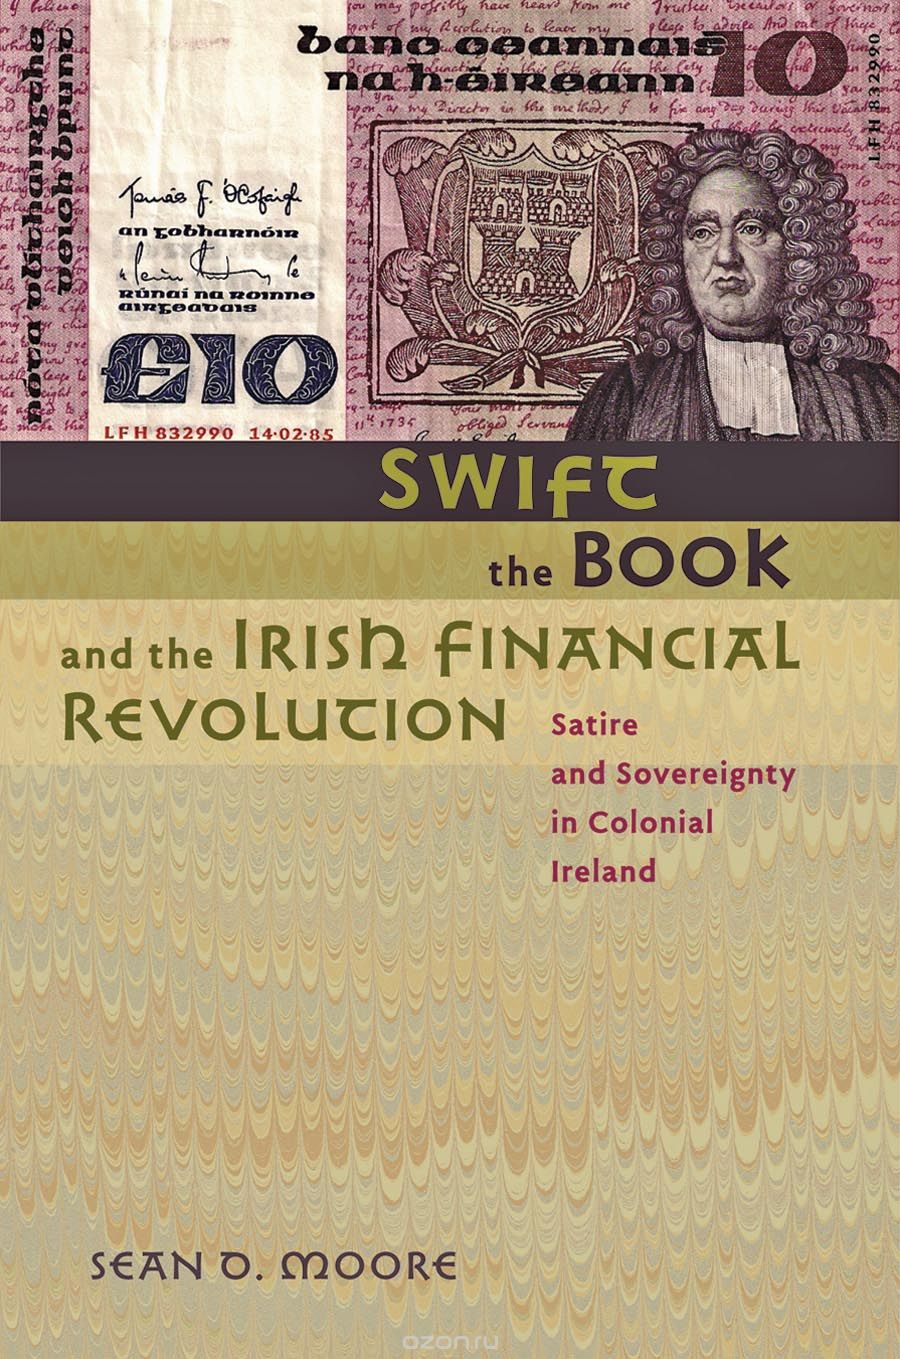 Swift, the Book, and the Irish Financial Revolution – Satire and Sovereignty in Colonial Ireland